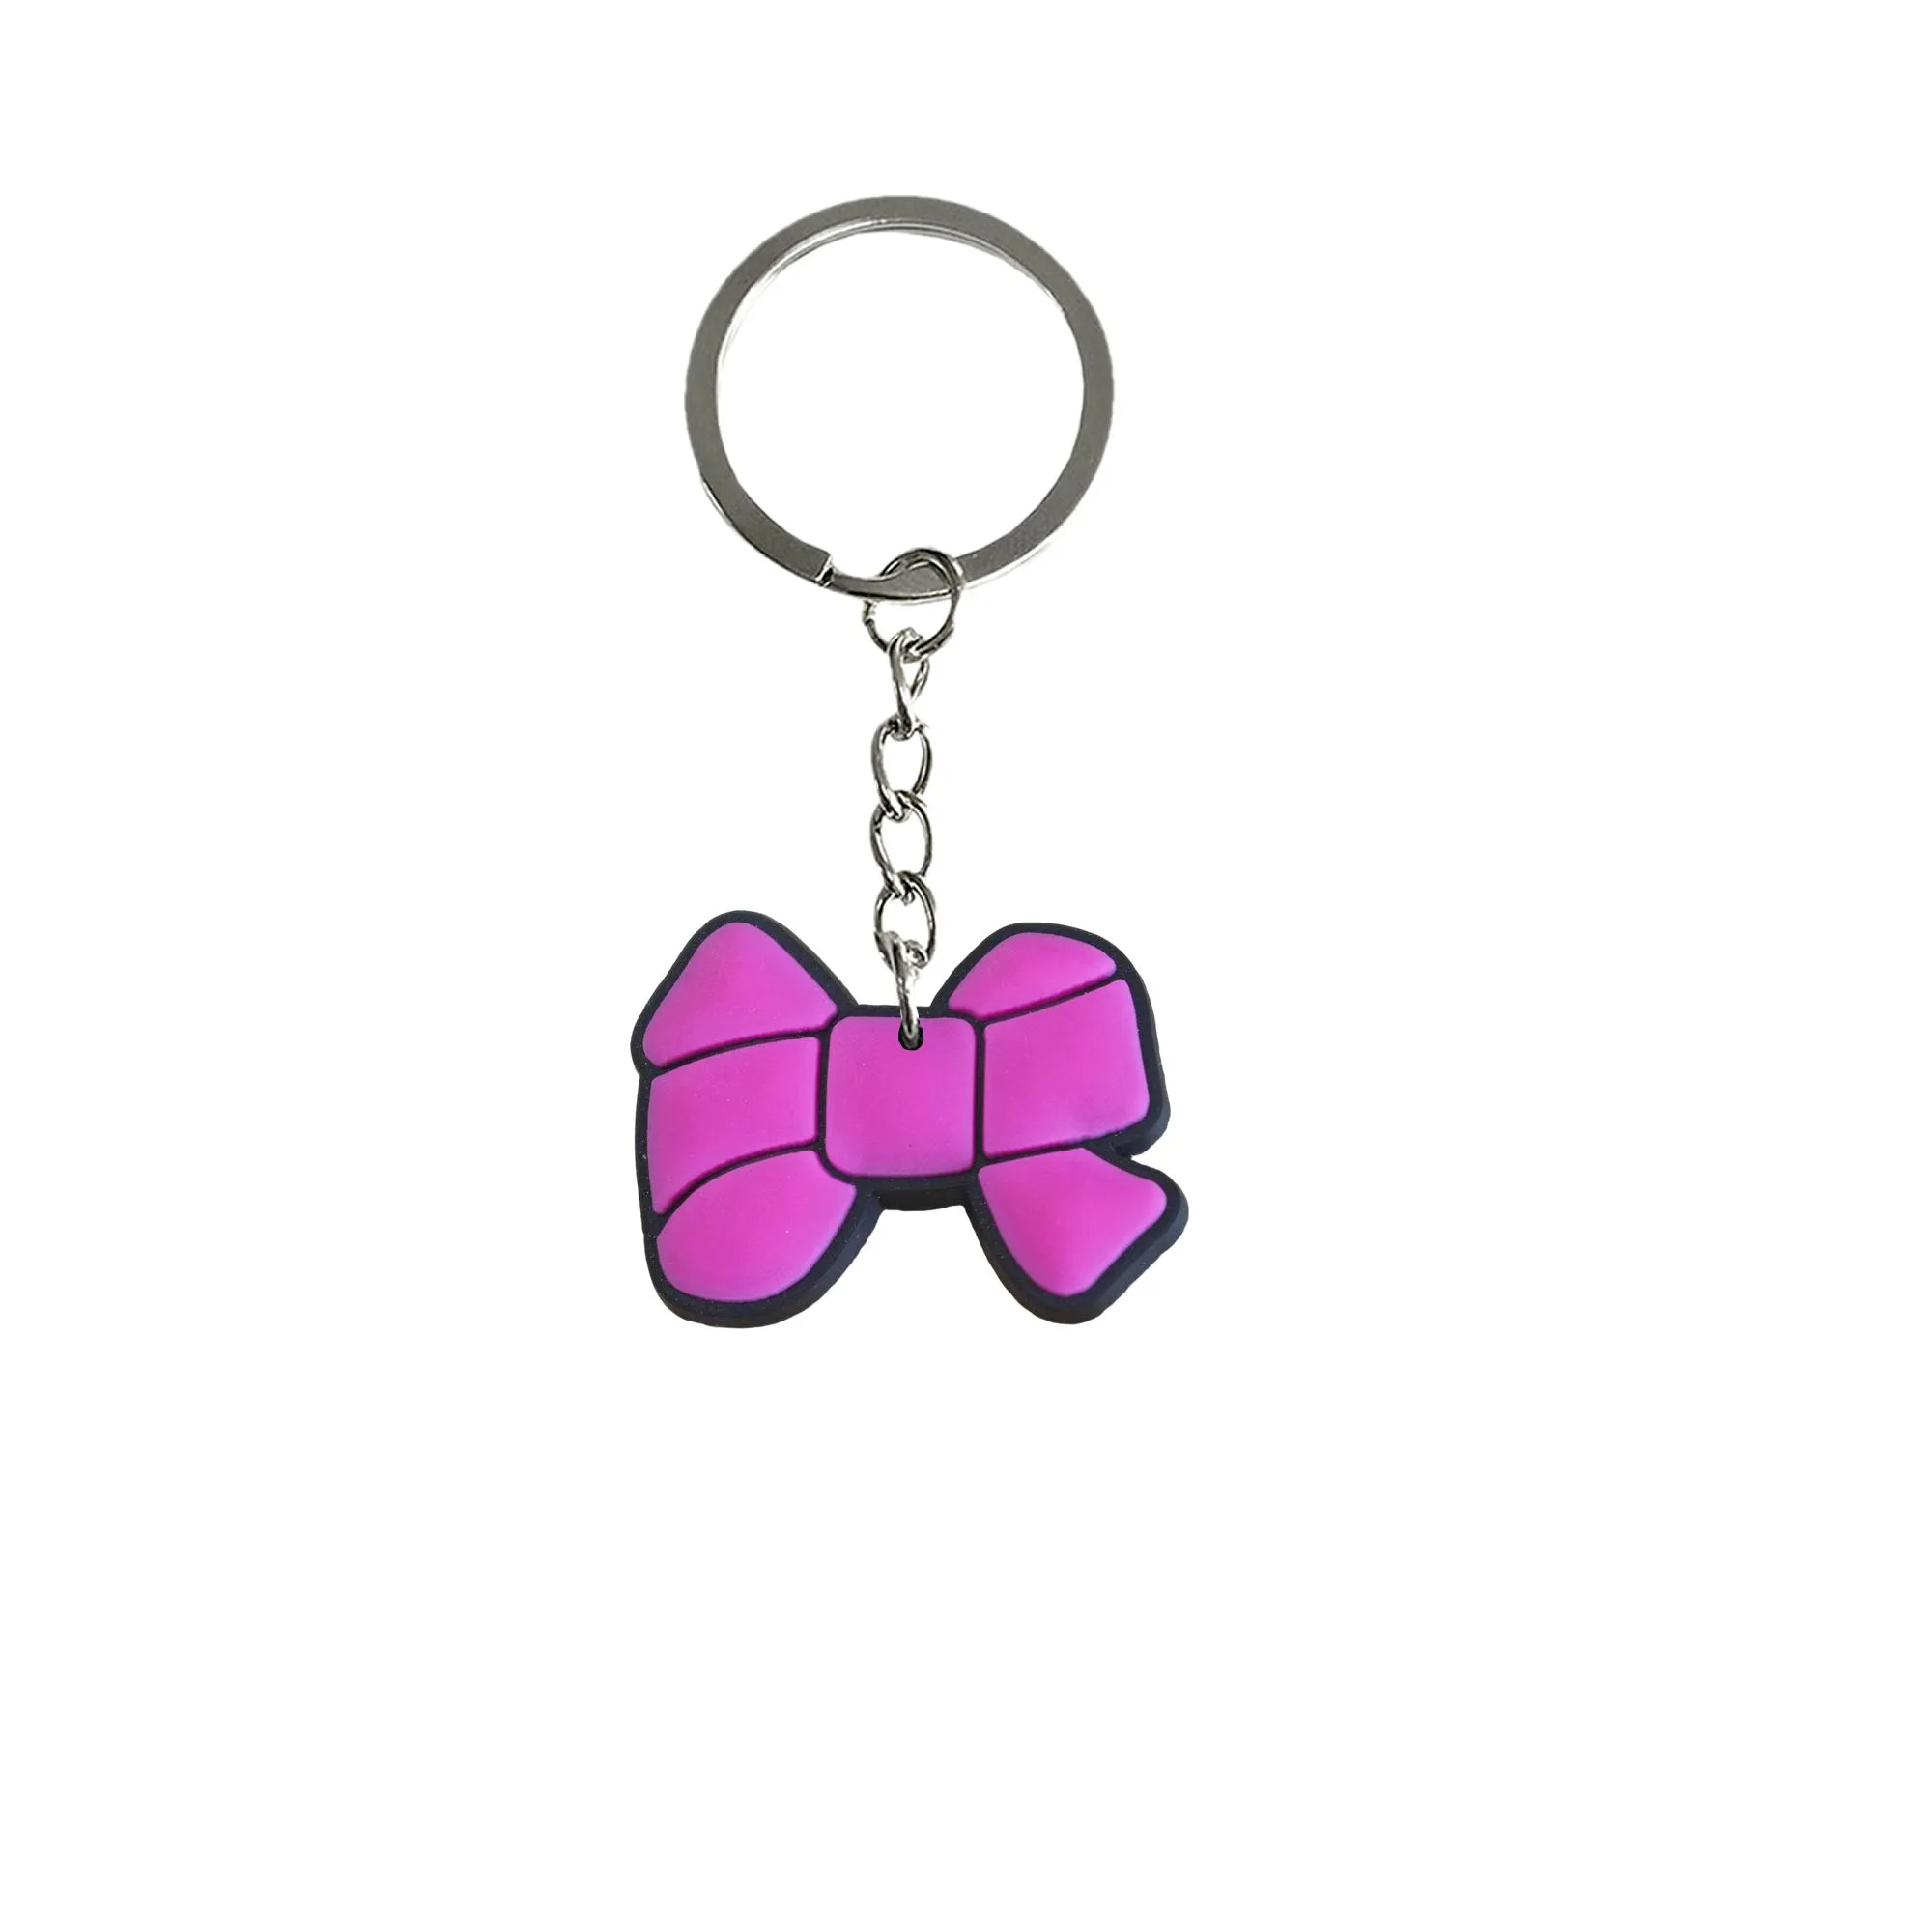 bow crown keychain couple backpack key chains for women keyring backpacks keychains boys suitable schoolbag pendant accessories bags school shoulder bag charm